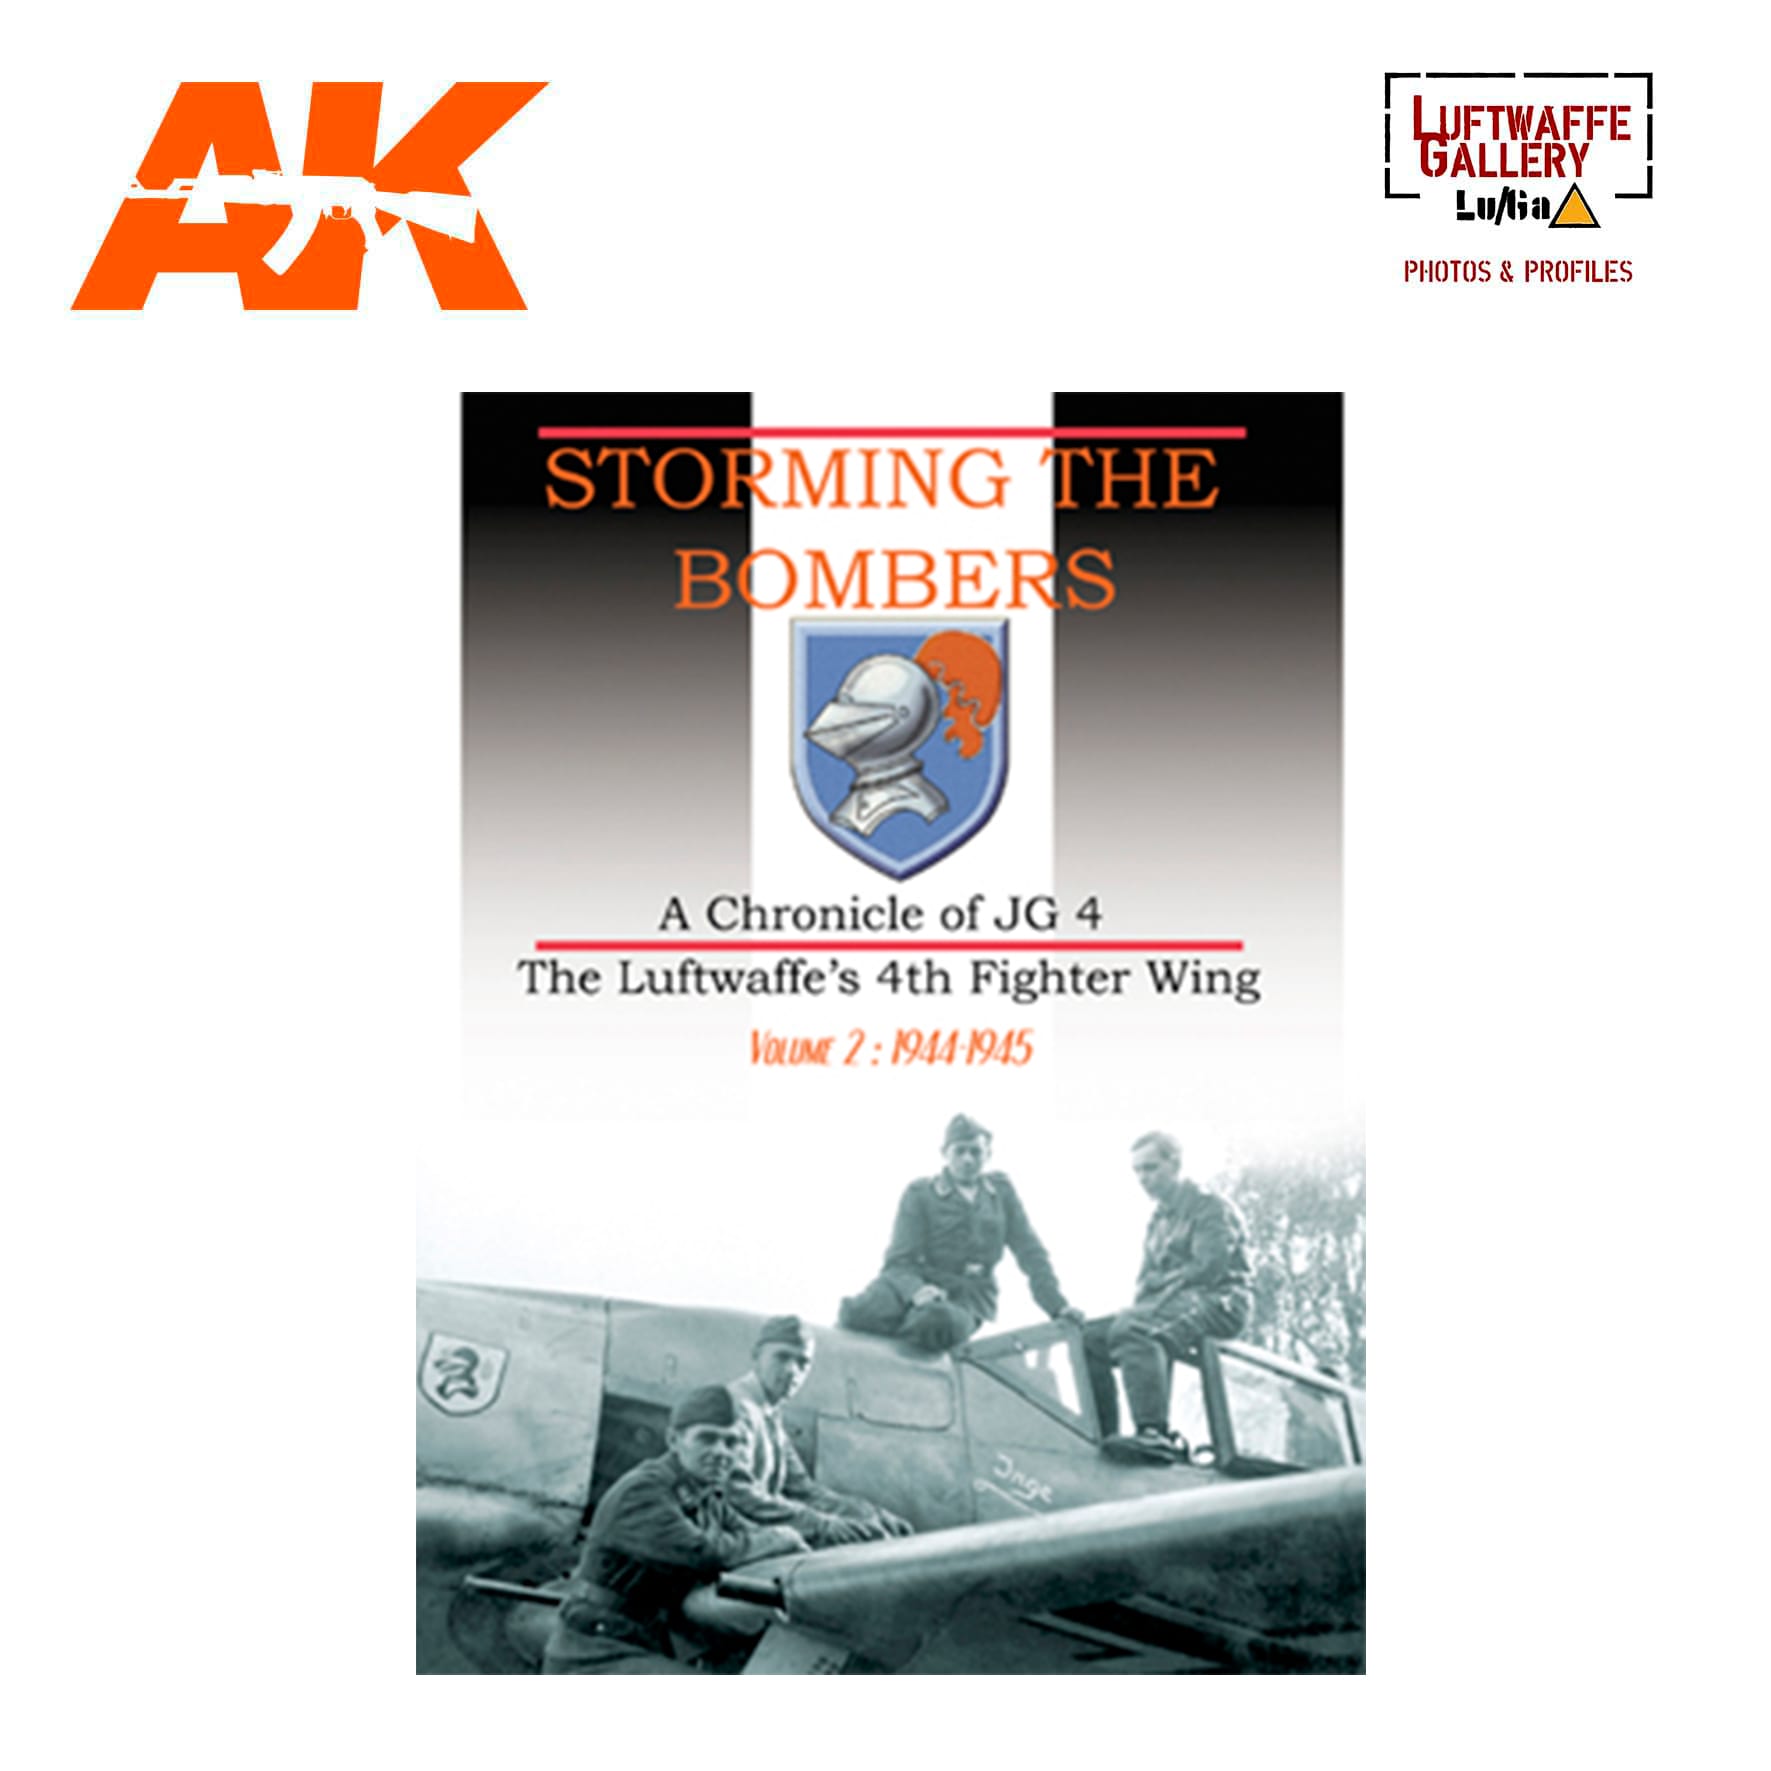 Storming the bombers. A Chronicle of JG 4 Vol. 2   1944-1945